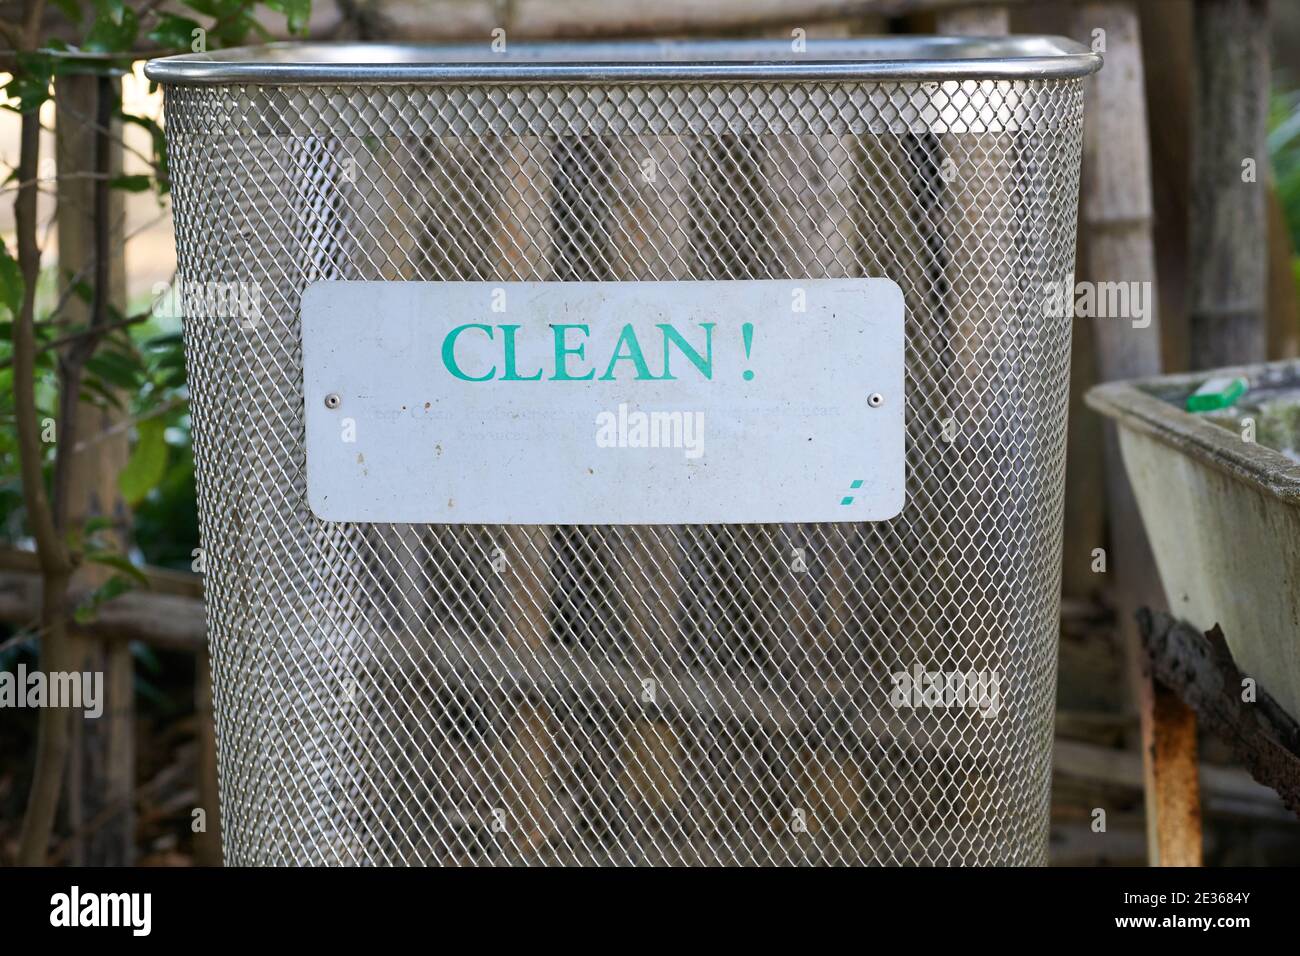 Outdoor metal rubbish bin in Japan with faded sign that now only says 'Clean!' Stock Photo